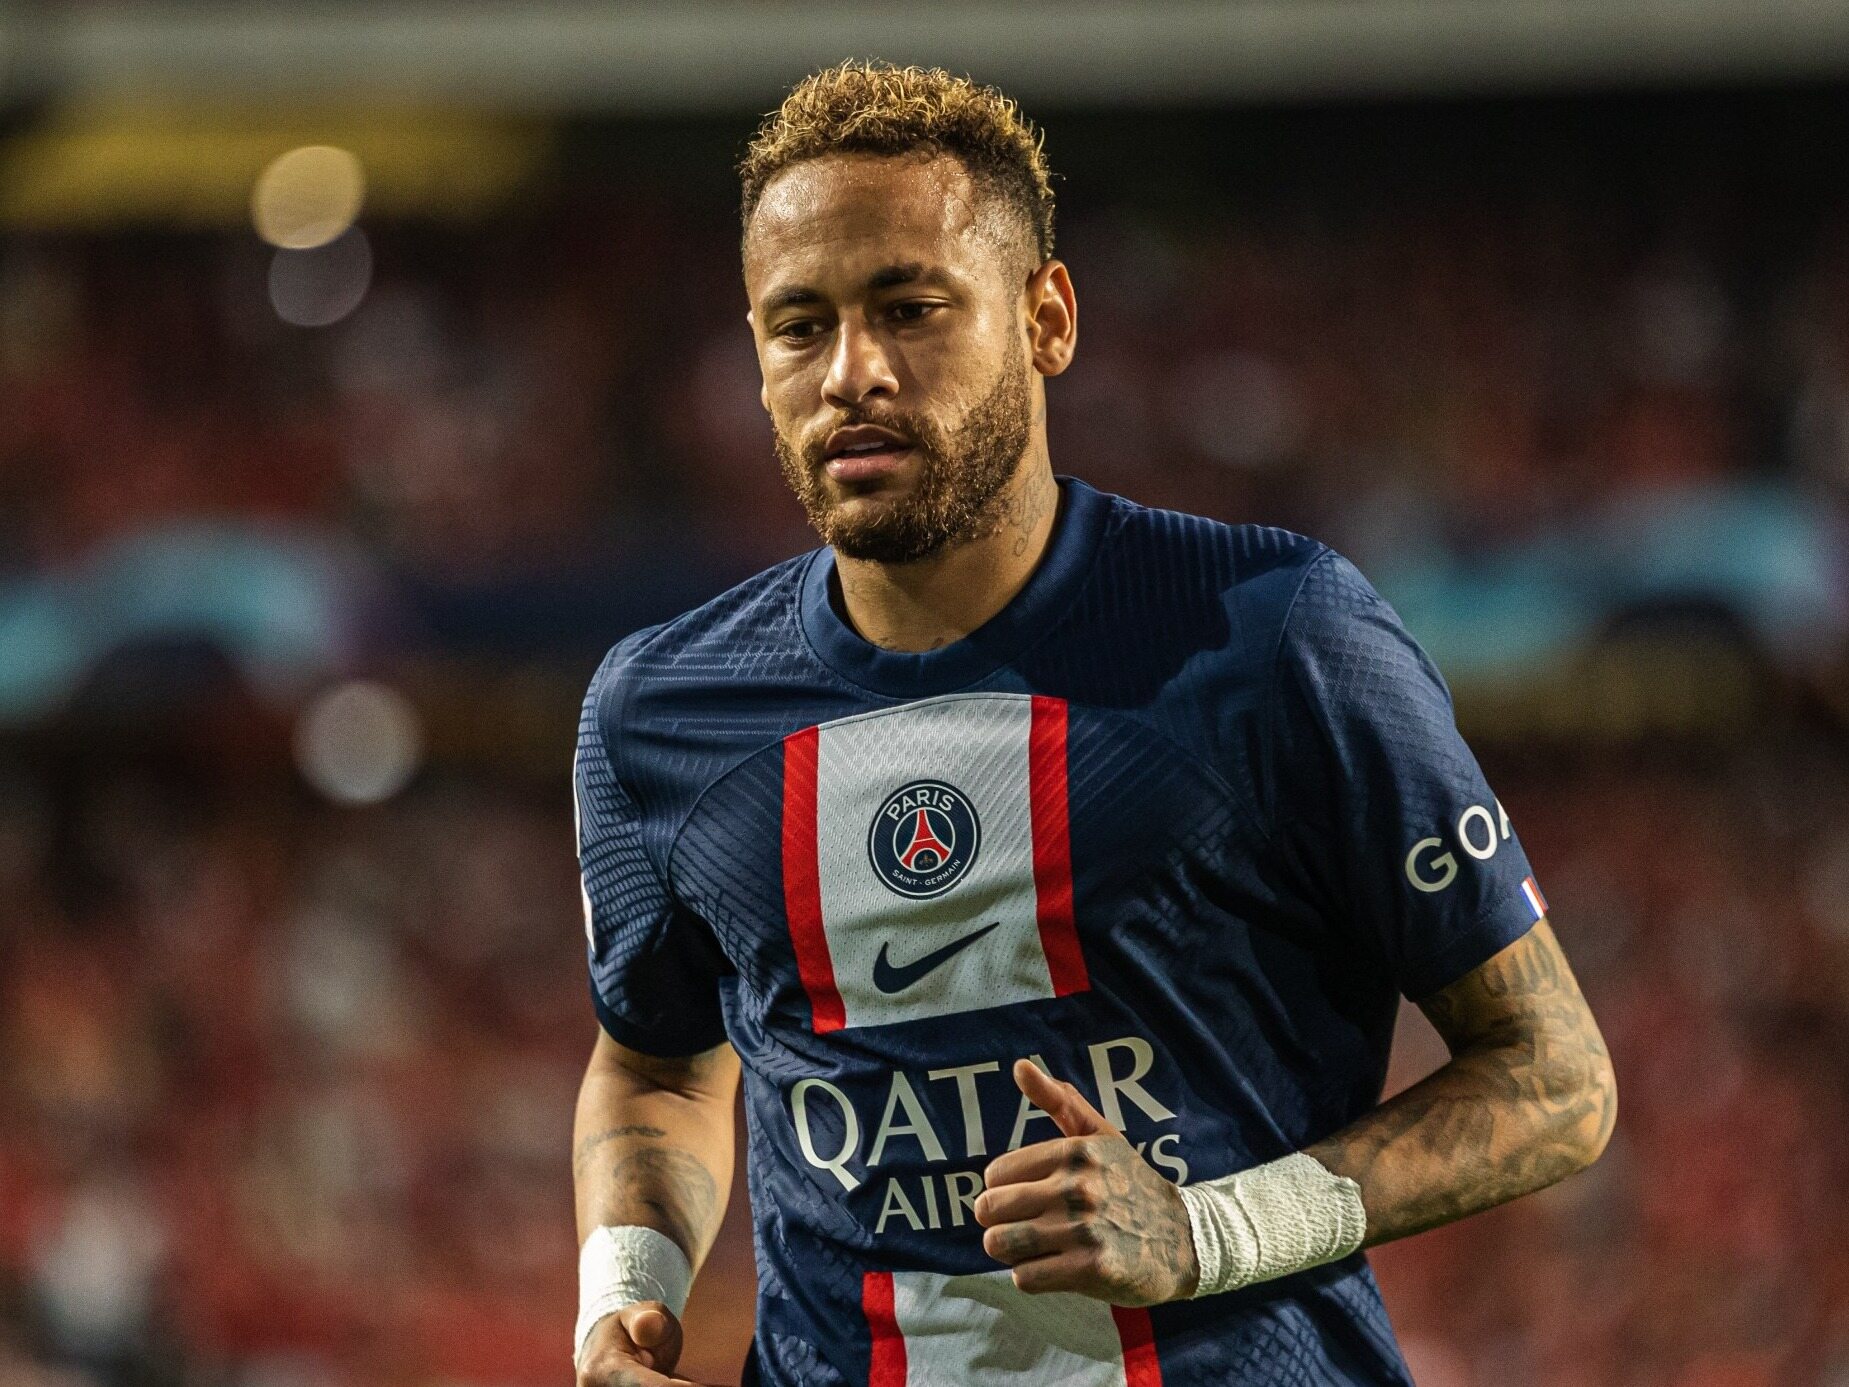 The transfer sensation becomes a fact.  Neymar leaves Europe